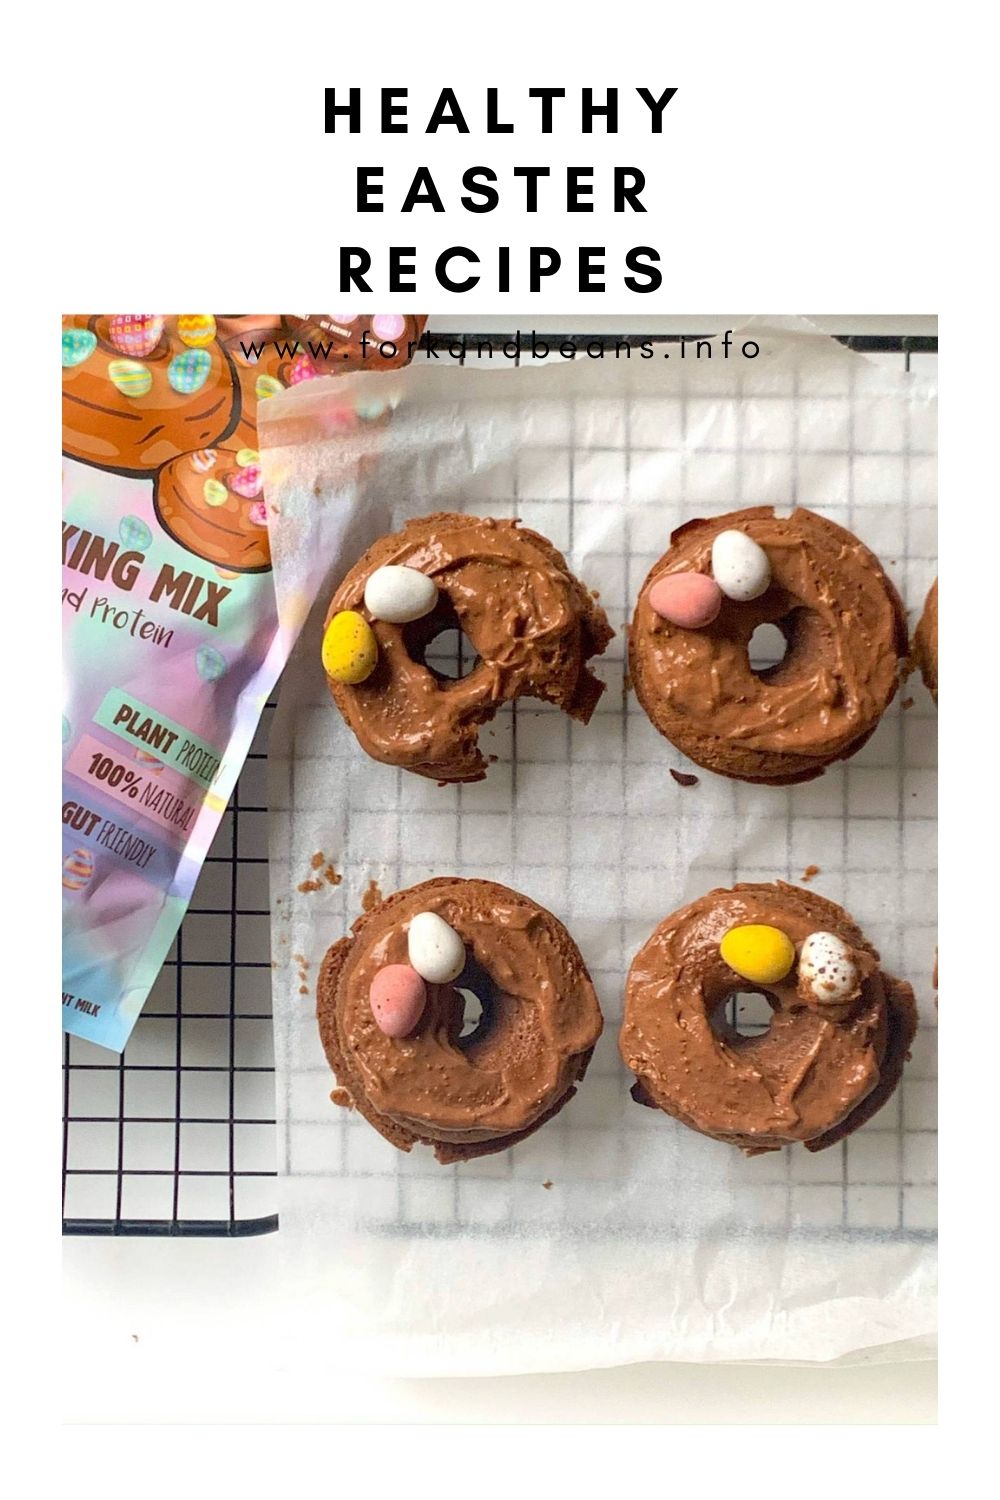 EPIC HEALTHY EASTER RECIPES